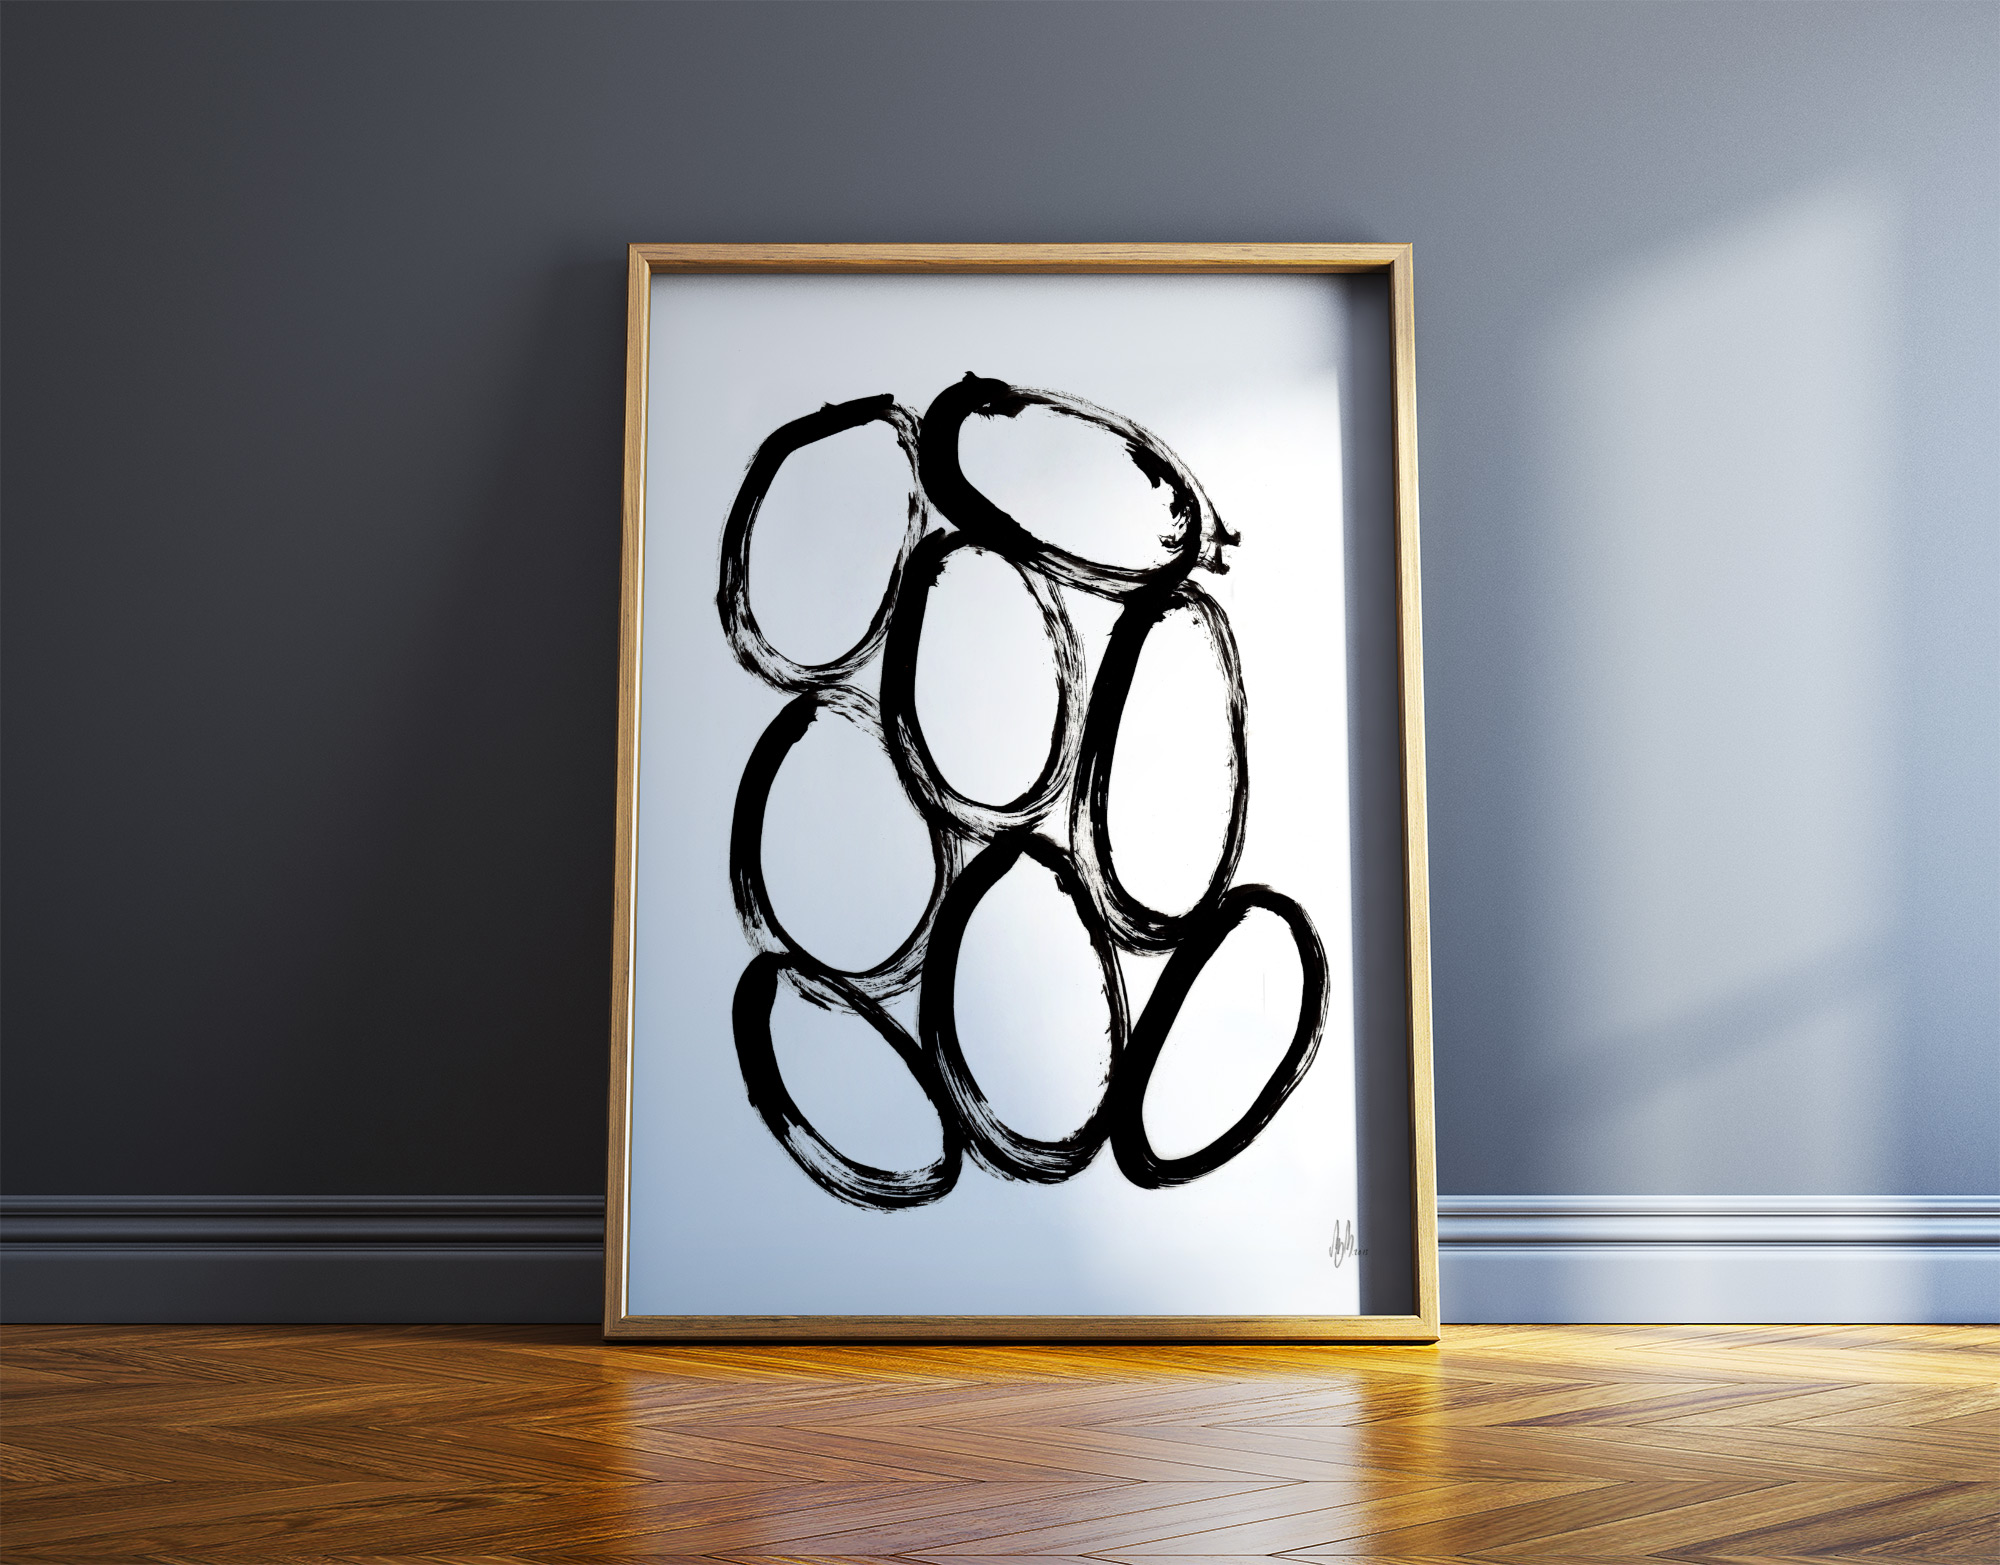 art-prints, gliceé, abstract, aesthetic, family-friendly, graphical, minimalistic, monochrome, movement, patterns, black, white, ink, paper, abstract-forms, black-and-white, contemporary-art, danish, design, interior, interior-design, modern, modern-art, nordic, posters, scandinavien, Buy original high quality art. Paintings, drawings, limited edition prints & posters by talented artists.